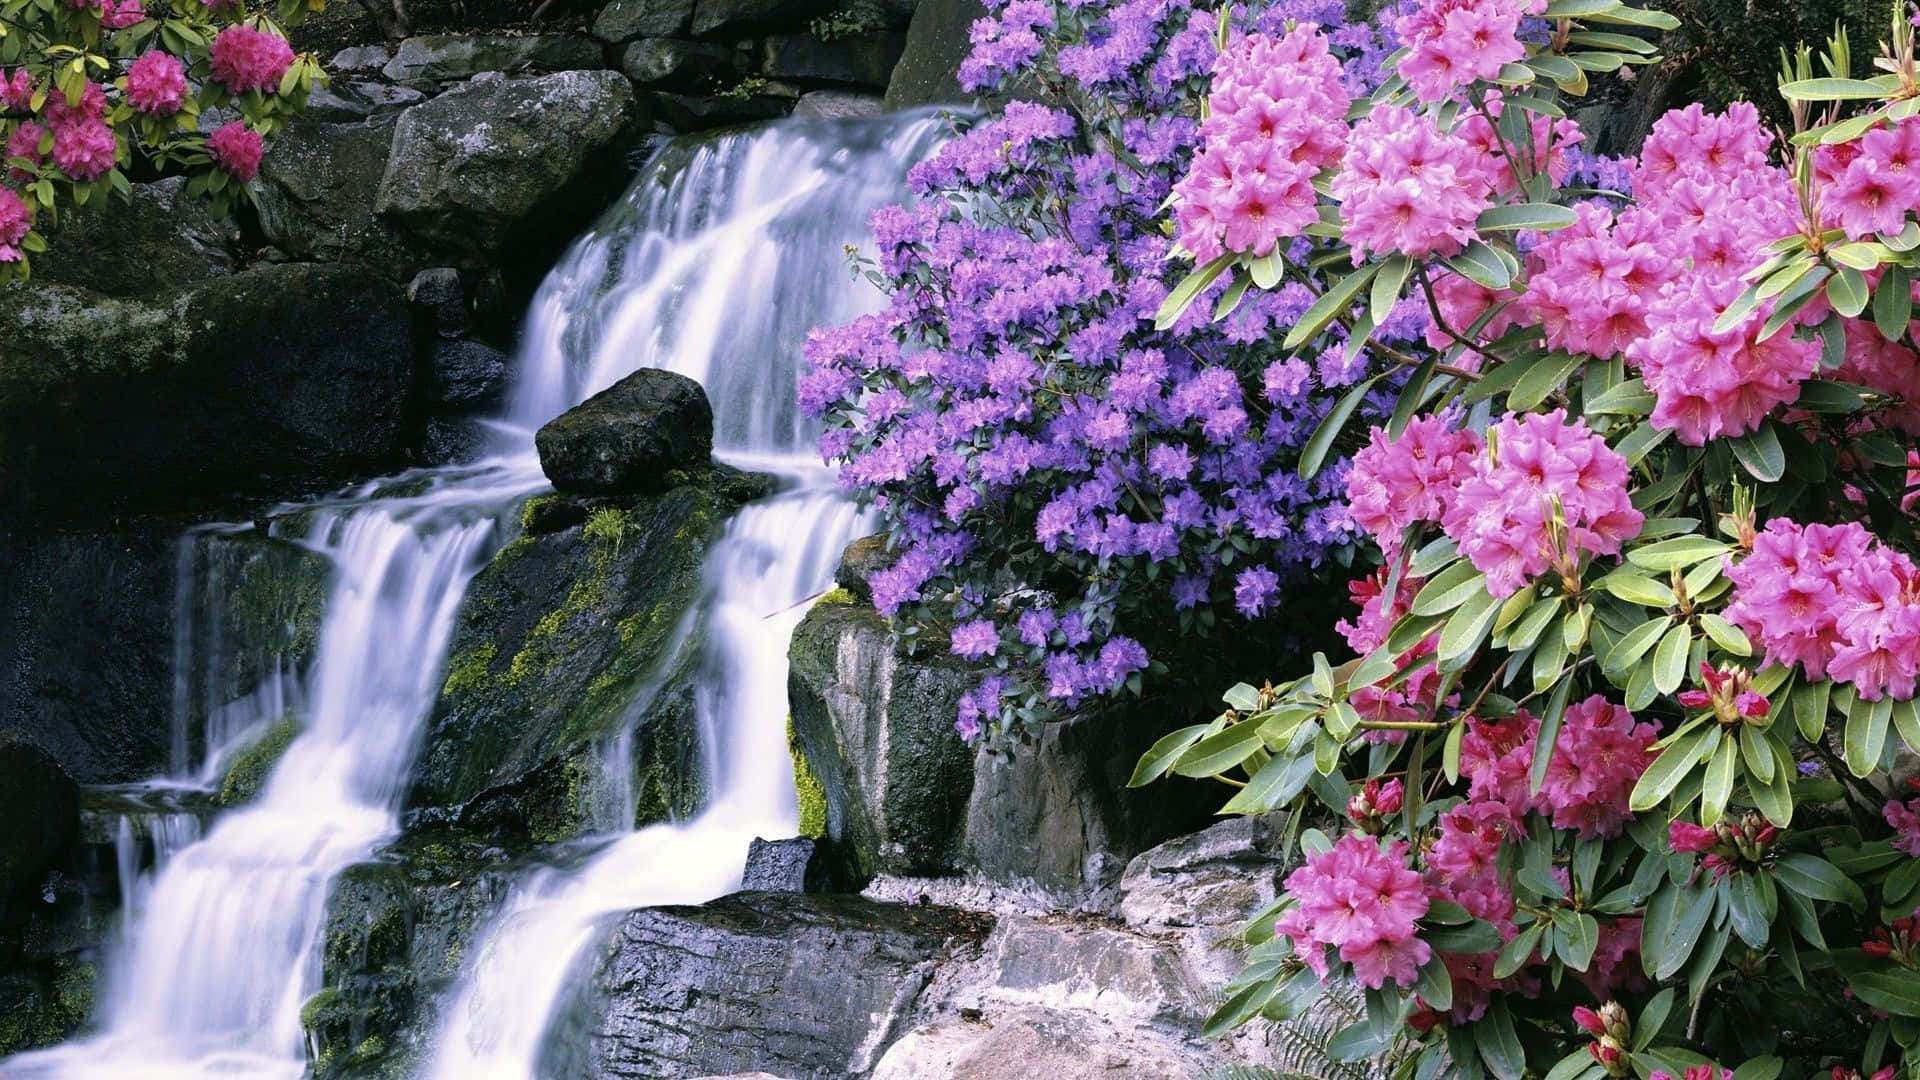 Enjoy the tranquility of cascading waterfalls